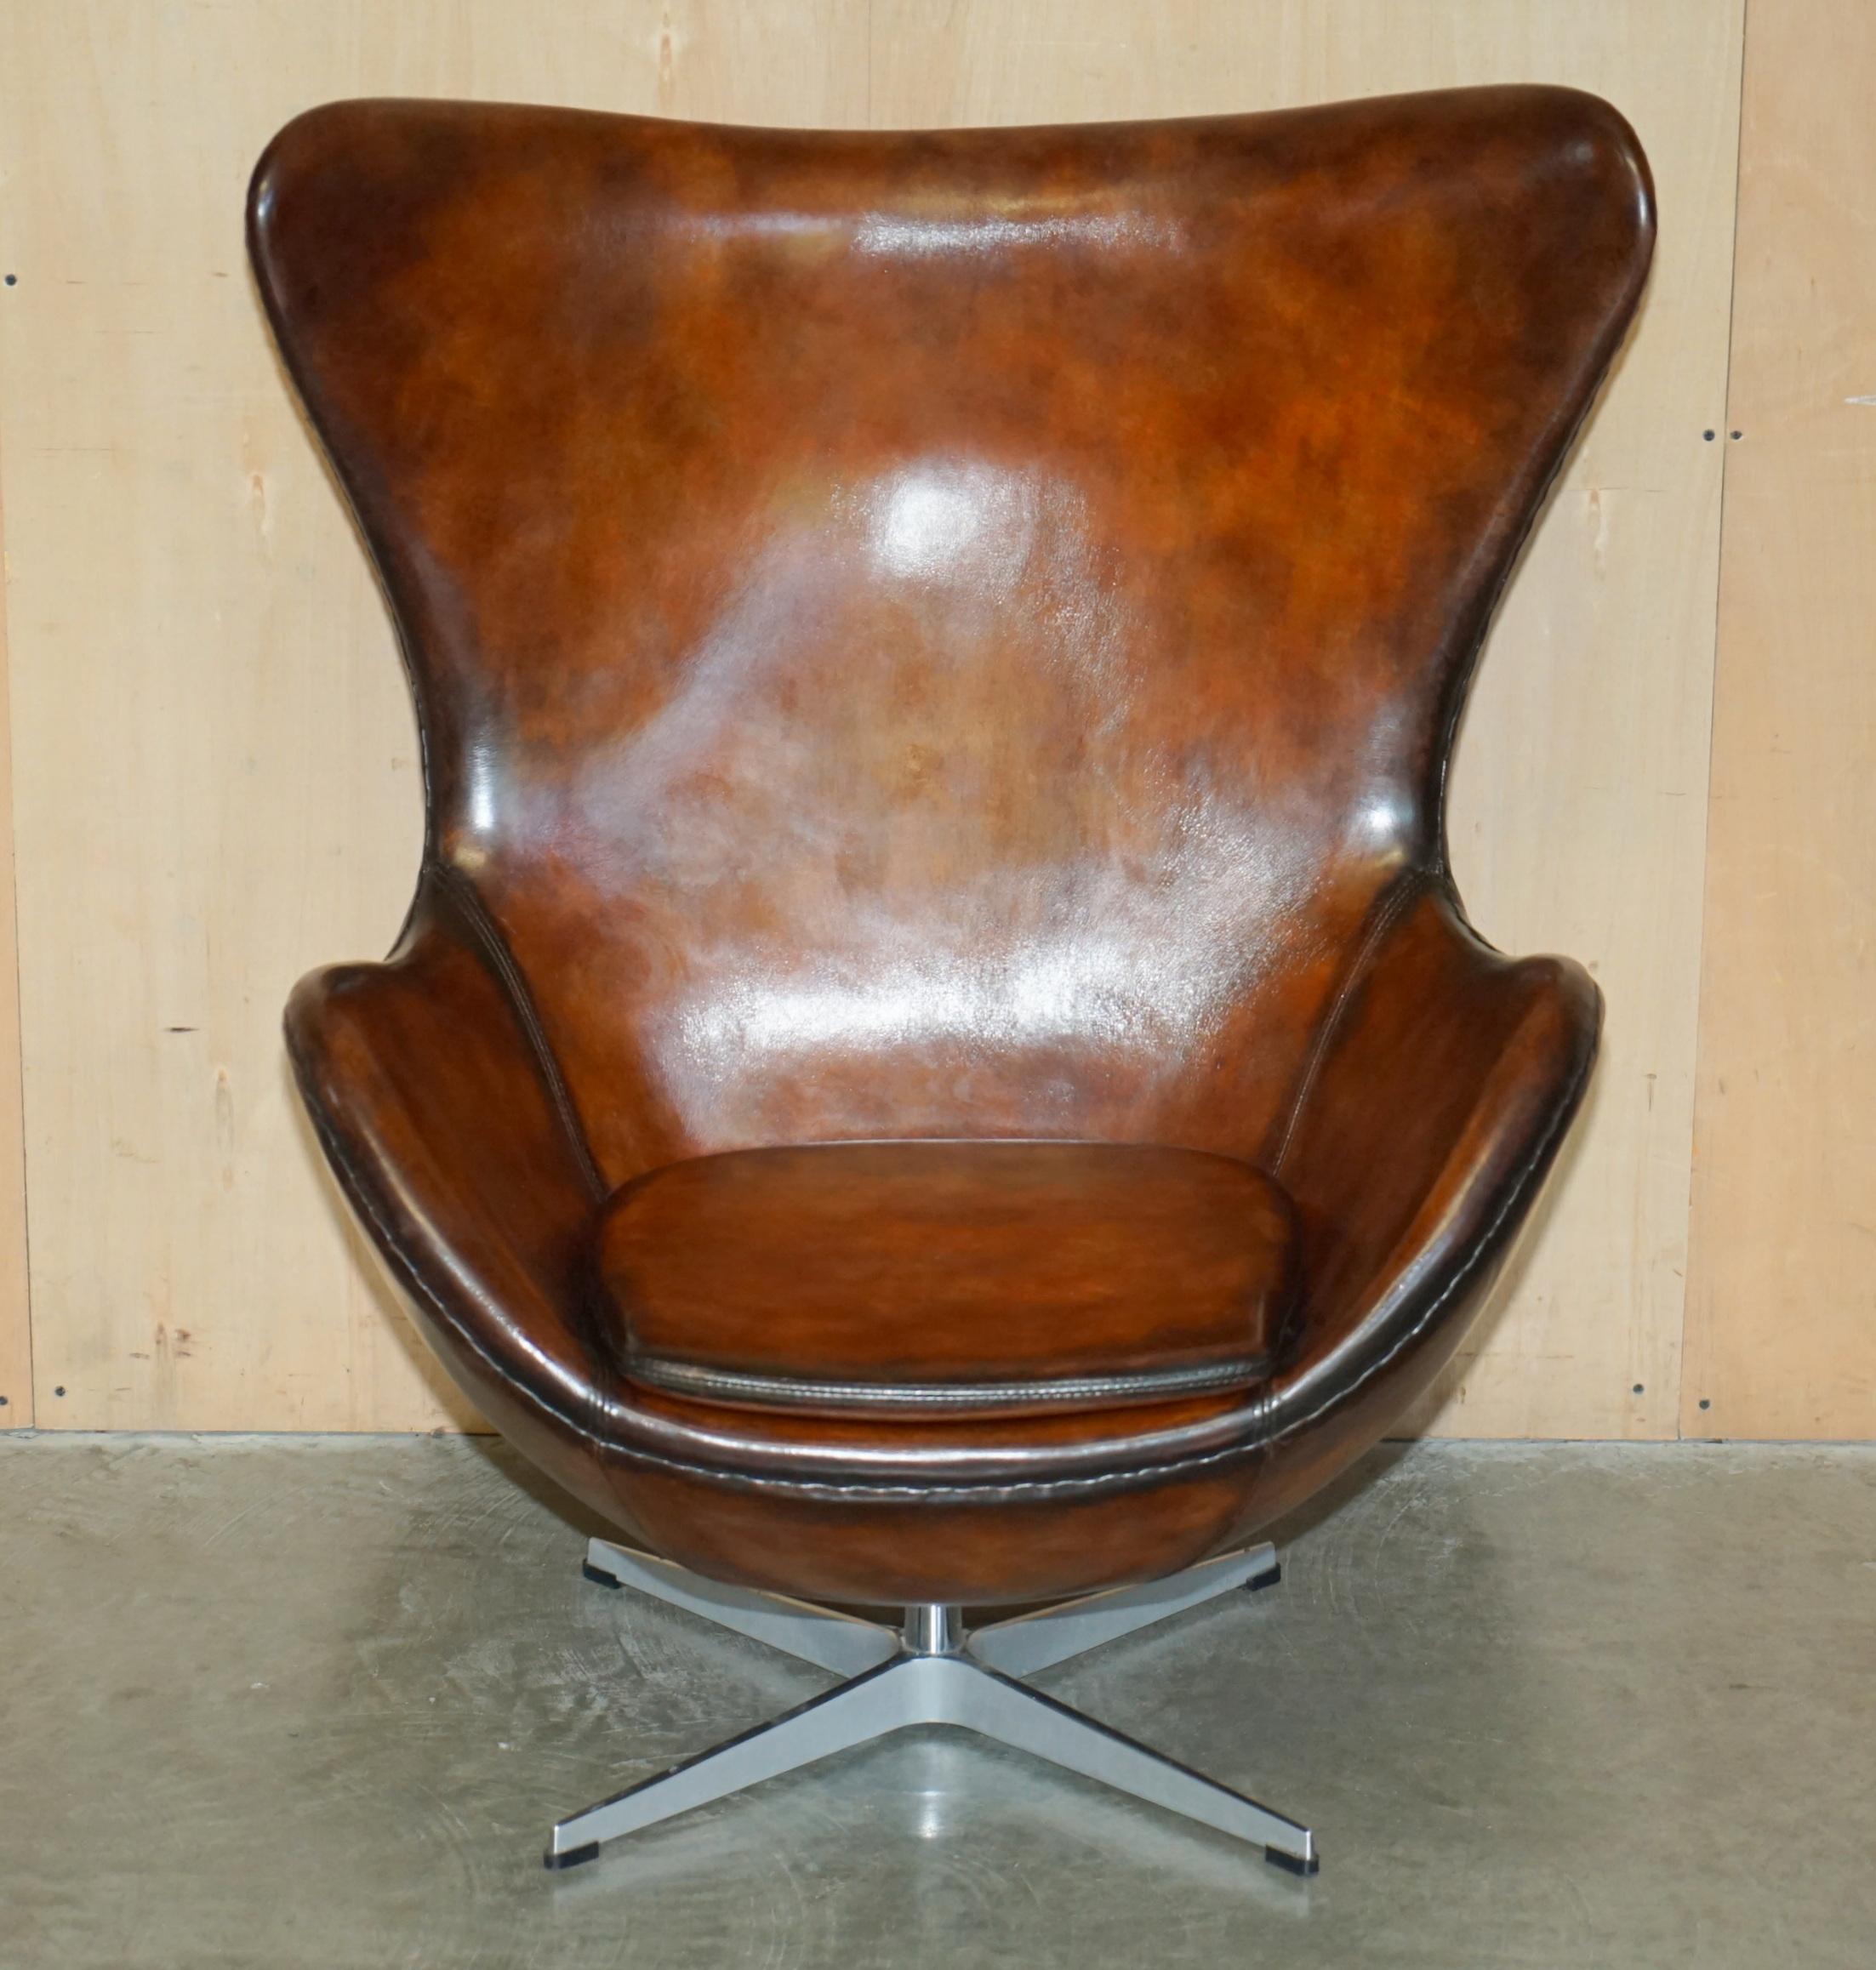 Royal House Antiques

Royal House Antiques is delighted to offer for sale 1 of 2 very fine, Vintage Fully Restored Fritz Hansen Style Egg Chairs in Whisky Brown Leather

Please note the delivery fee listed is just a guide, it covers within the M25